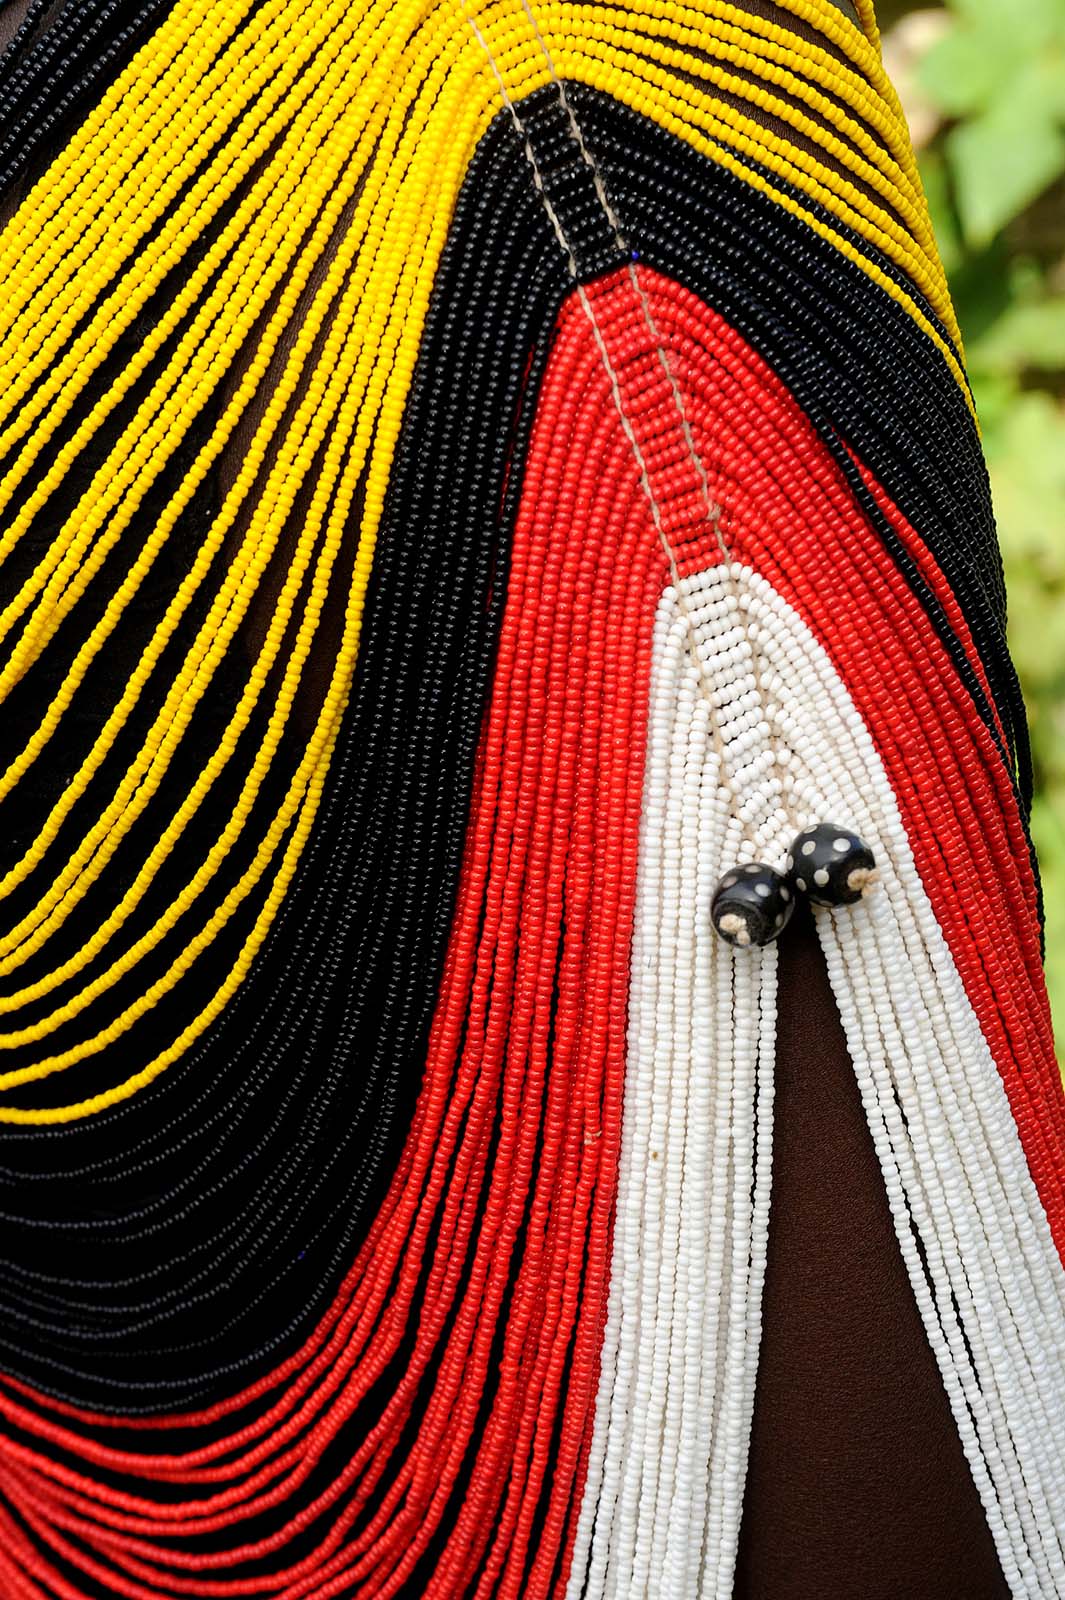 South Sudan_roots project mary padar_dinka corset detail_2012